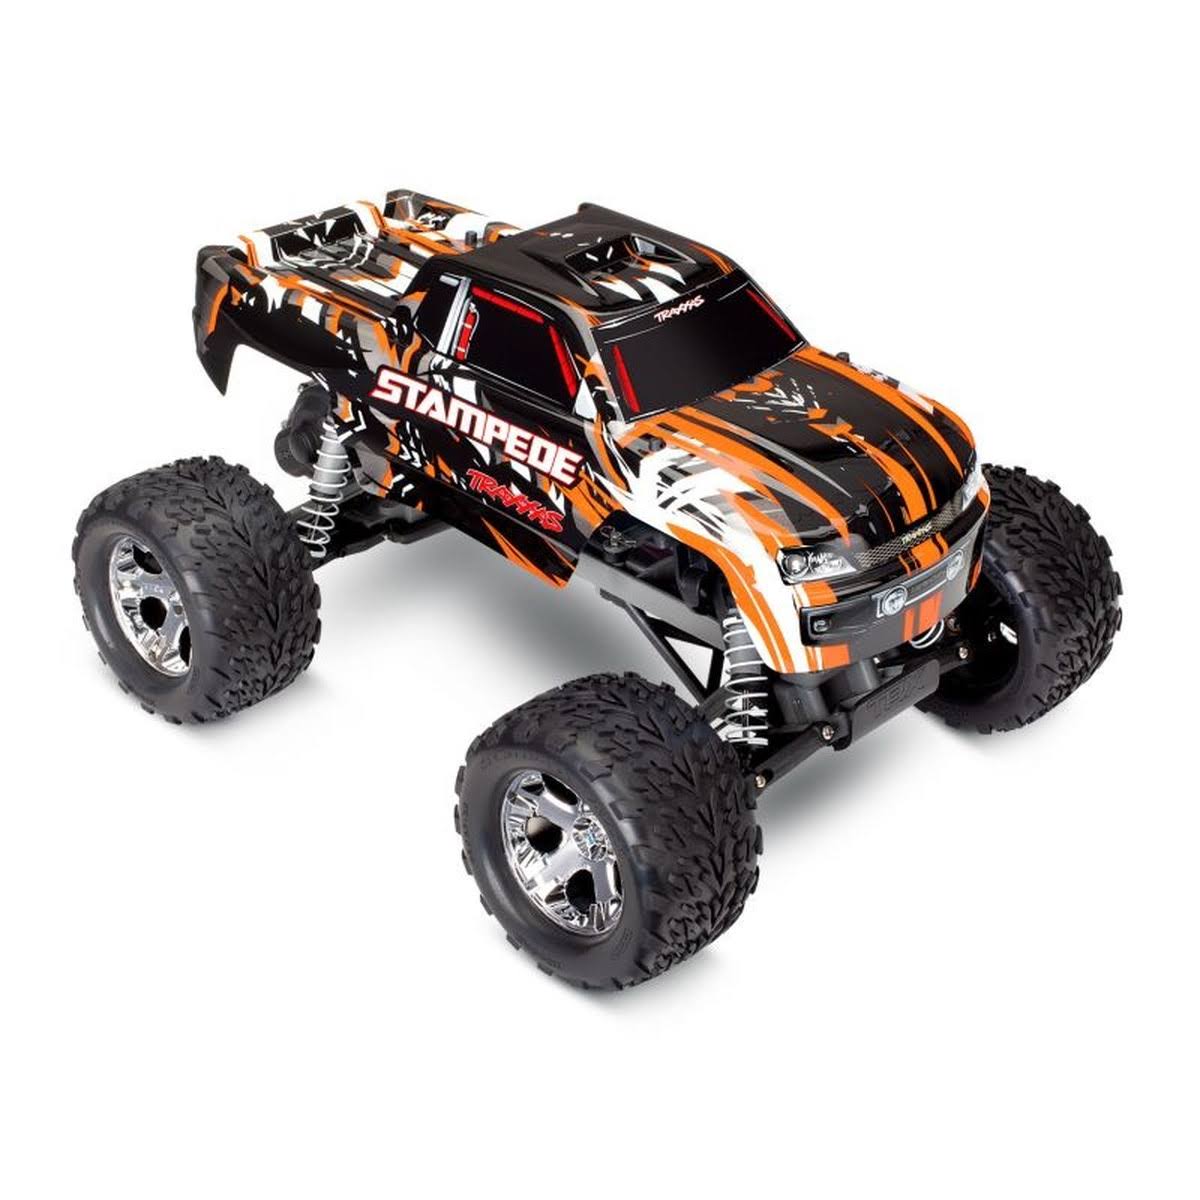 Traxxas Stampede 1/10 2WD Monster Truck with TQ 2.4GHz Radio, Blue, 1: